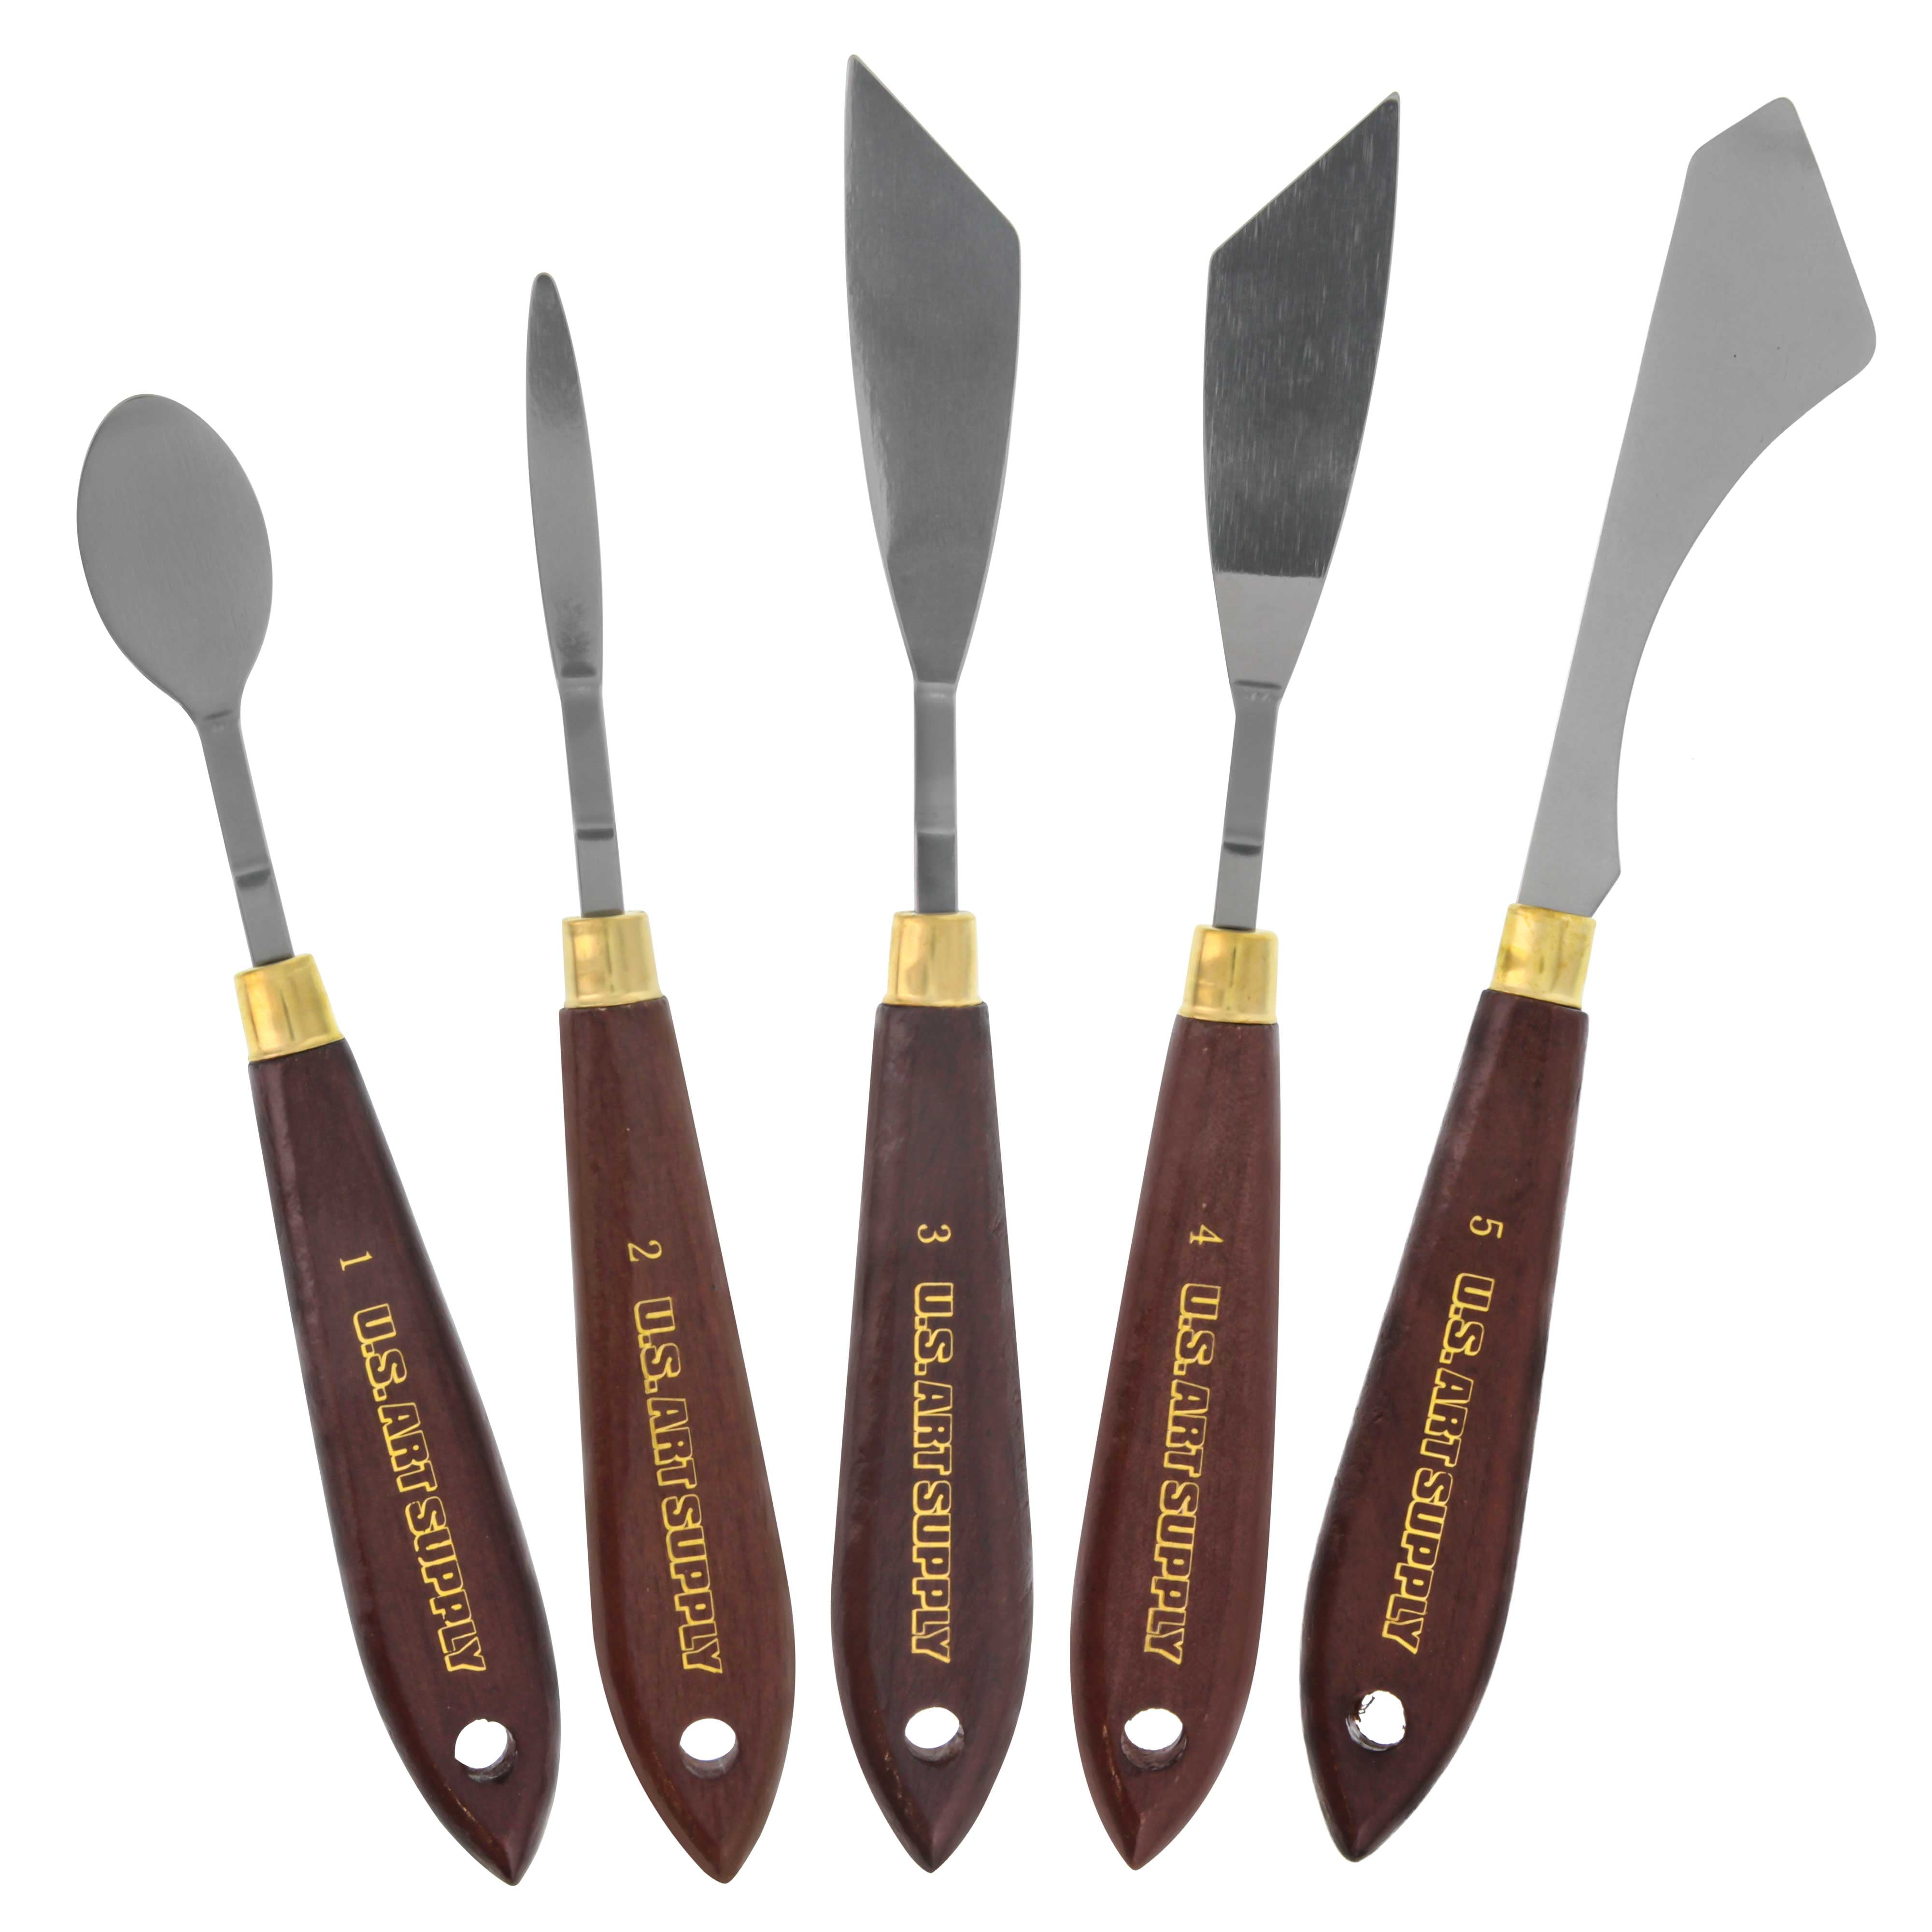 7 PIECE SET Stainless Steel Oil Painting Knives Artist Crafts Spatula